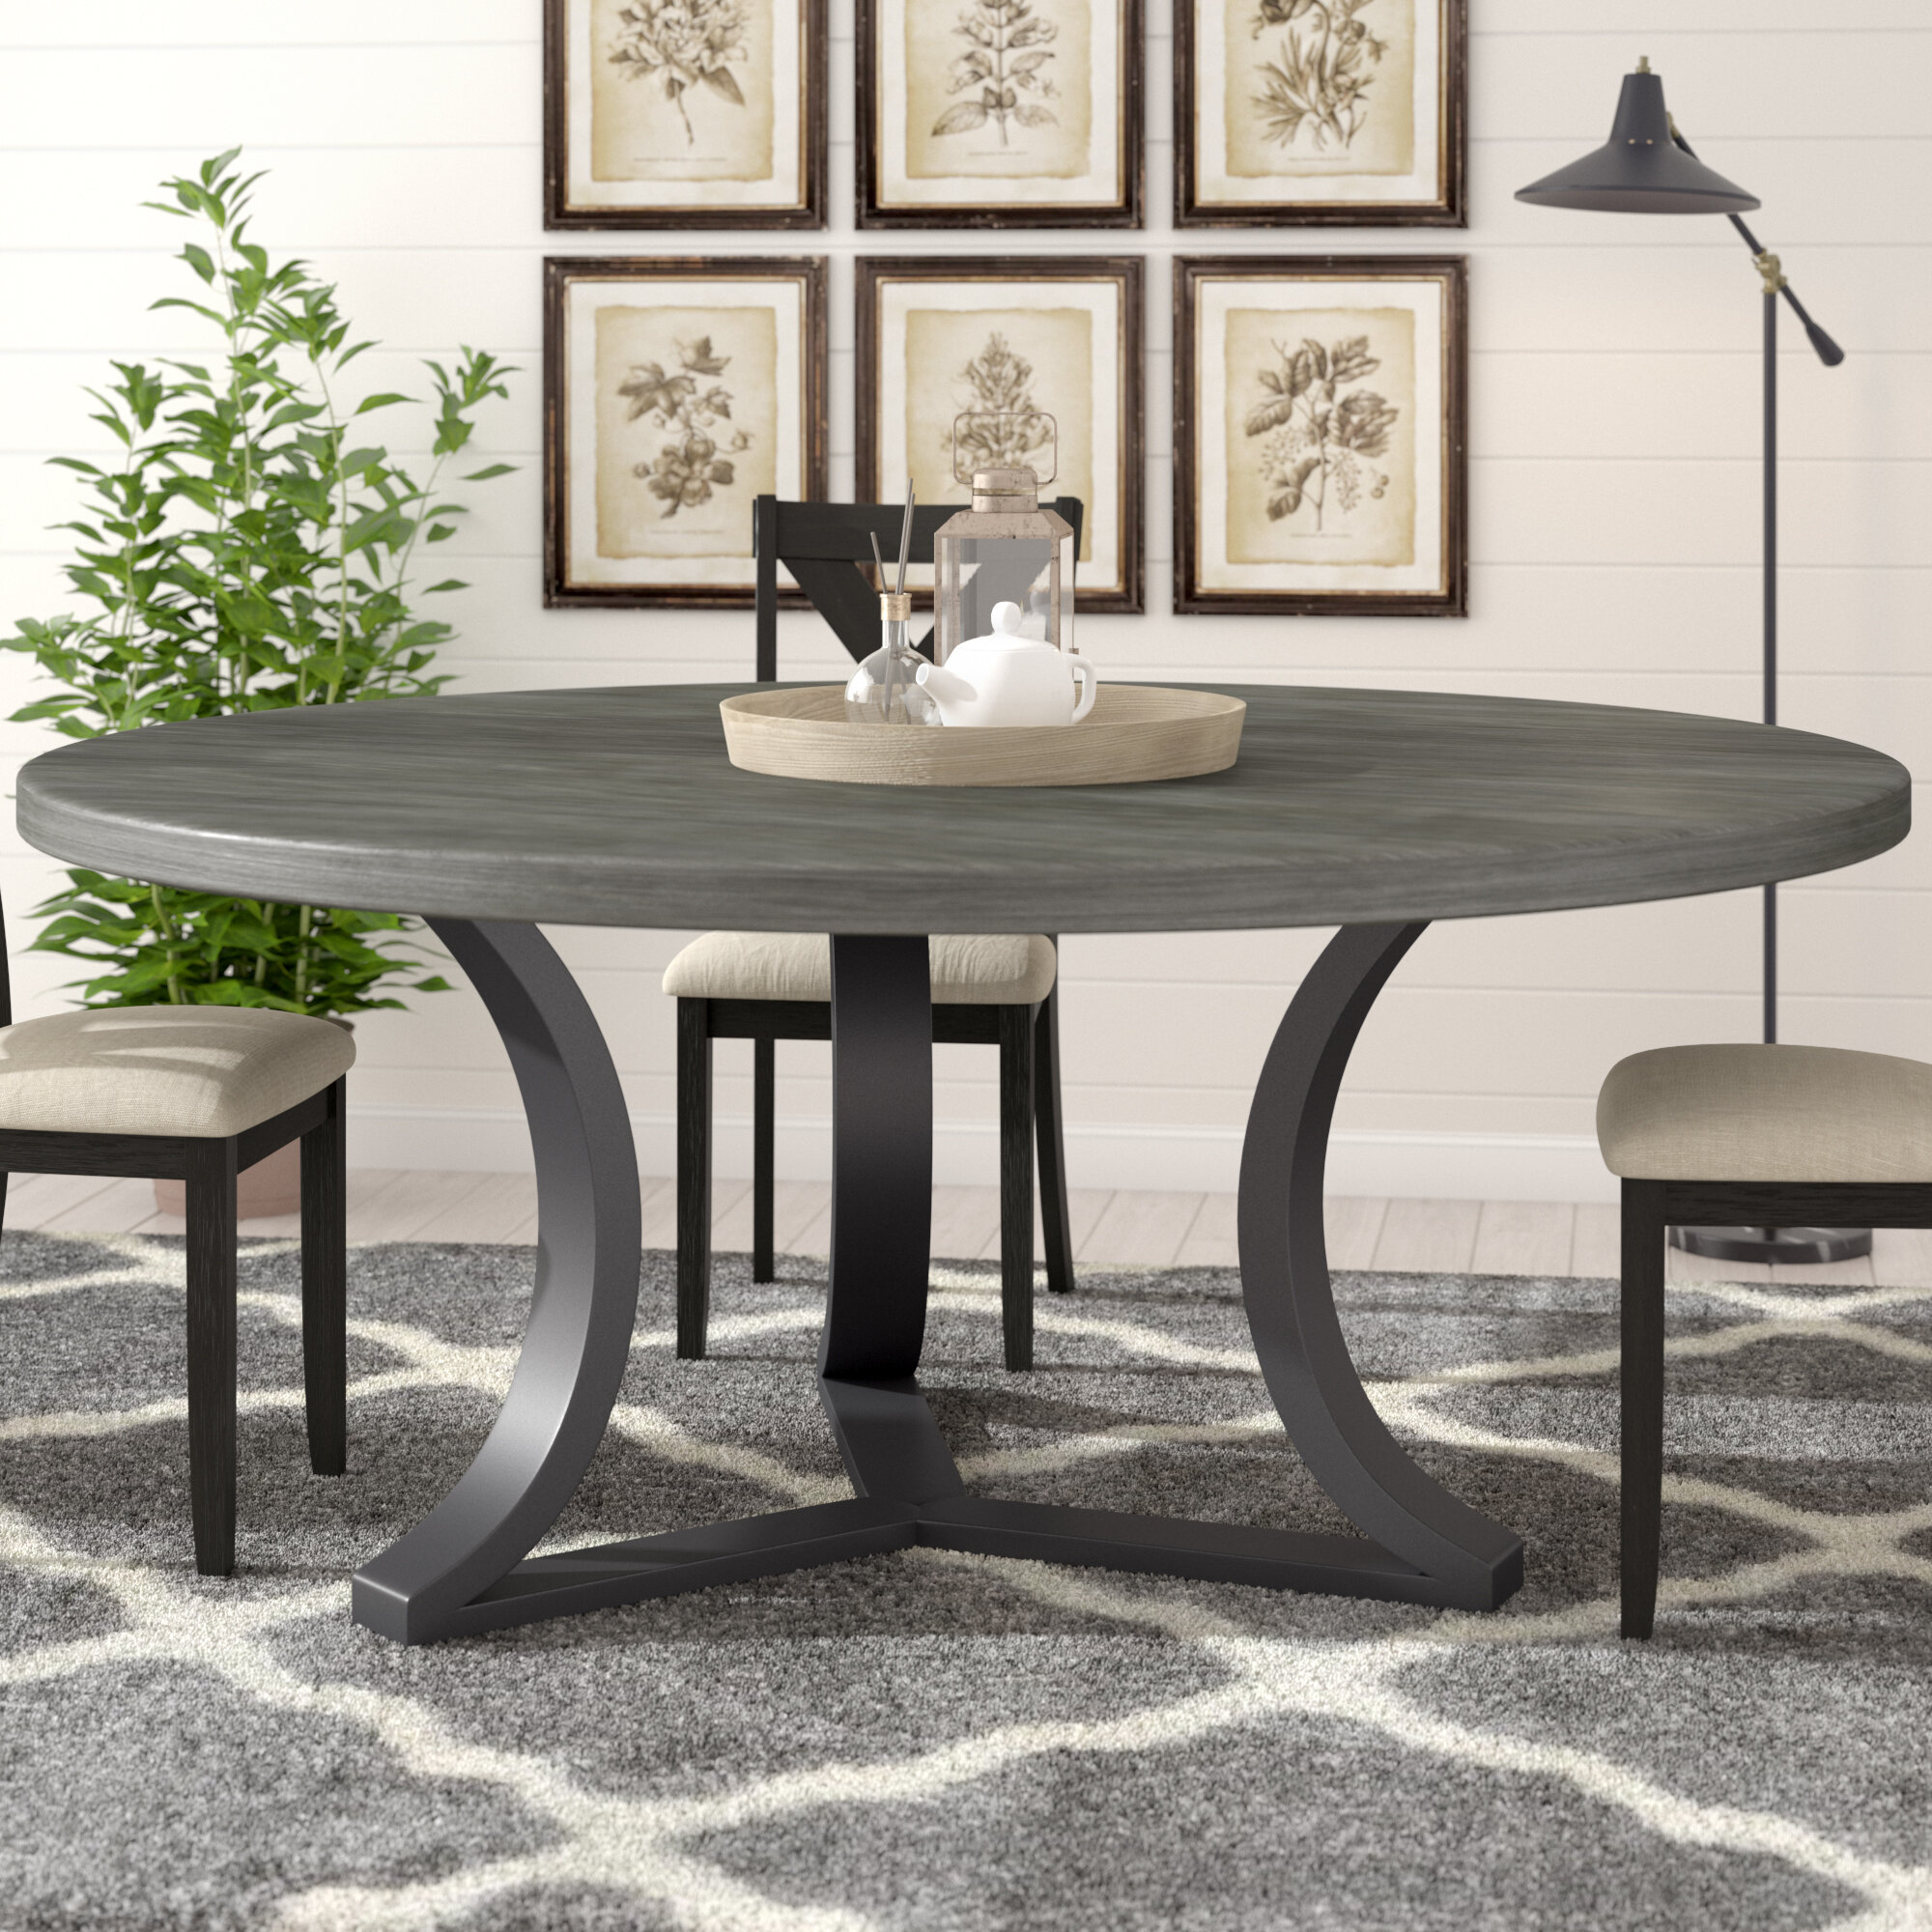 Round Dining Table For 8 Visualhunt, Round Dining Table 72 Inch